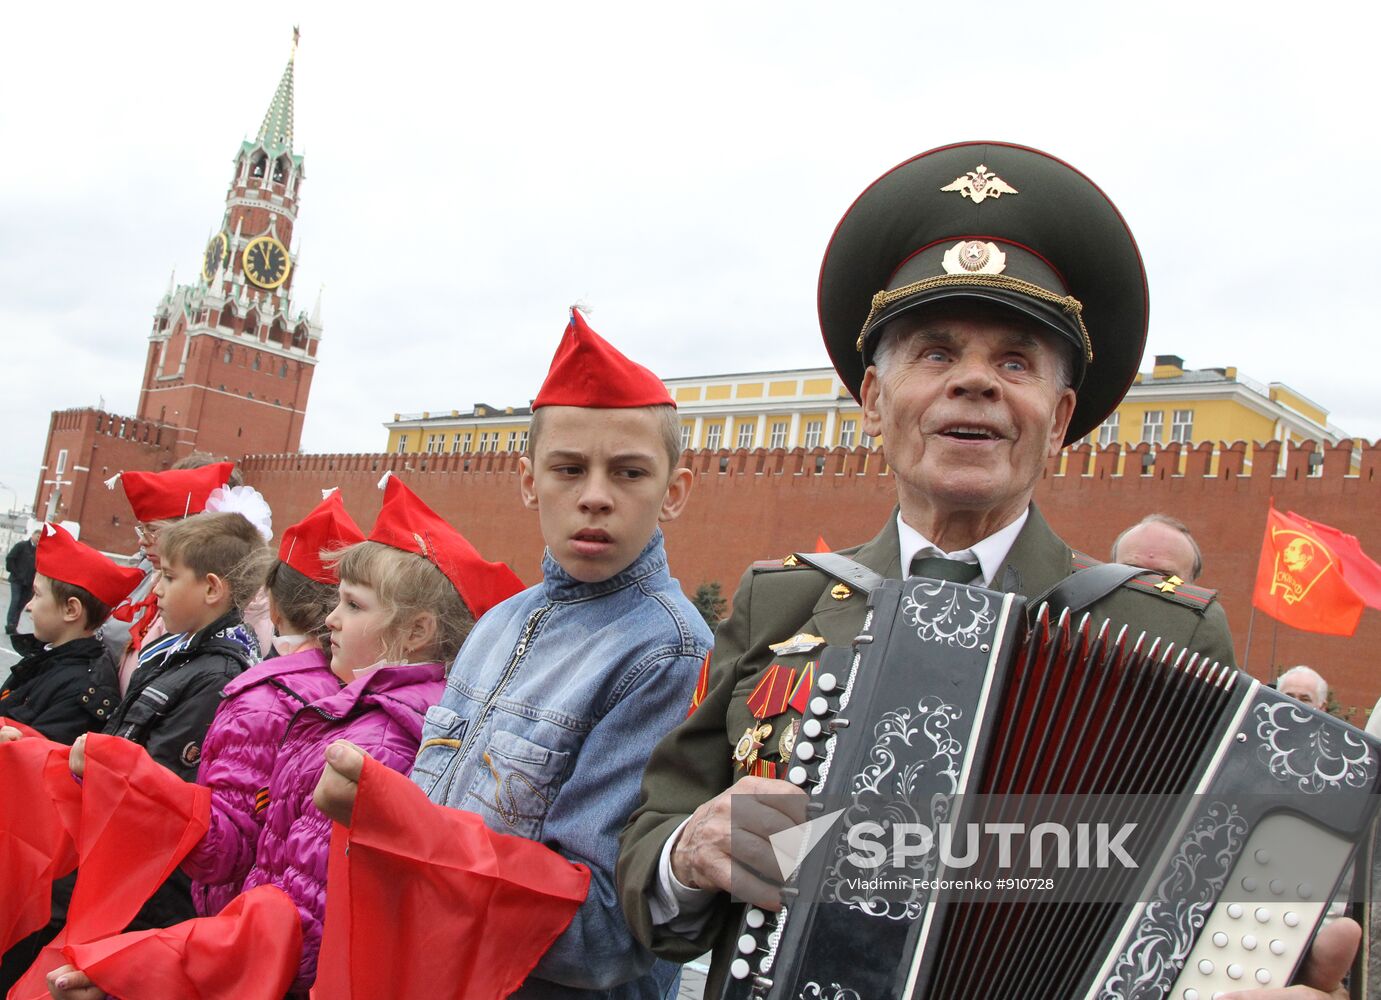 Young Pioneer induction ceremony held on Moscow's Red Square